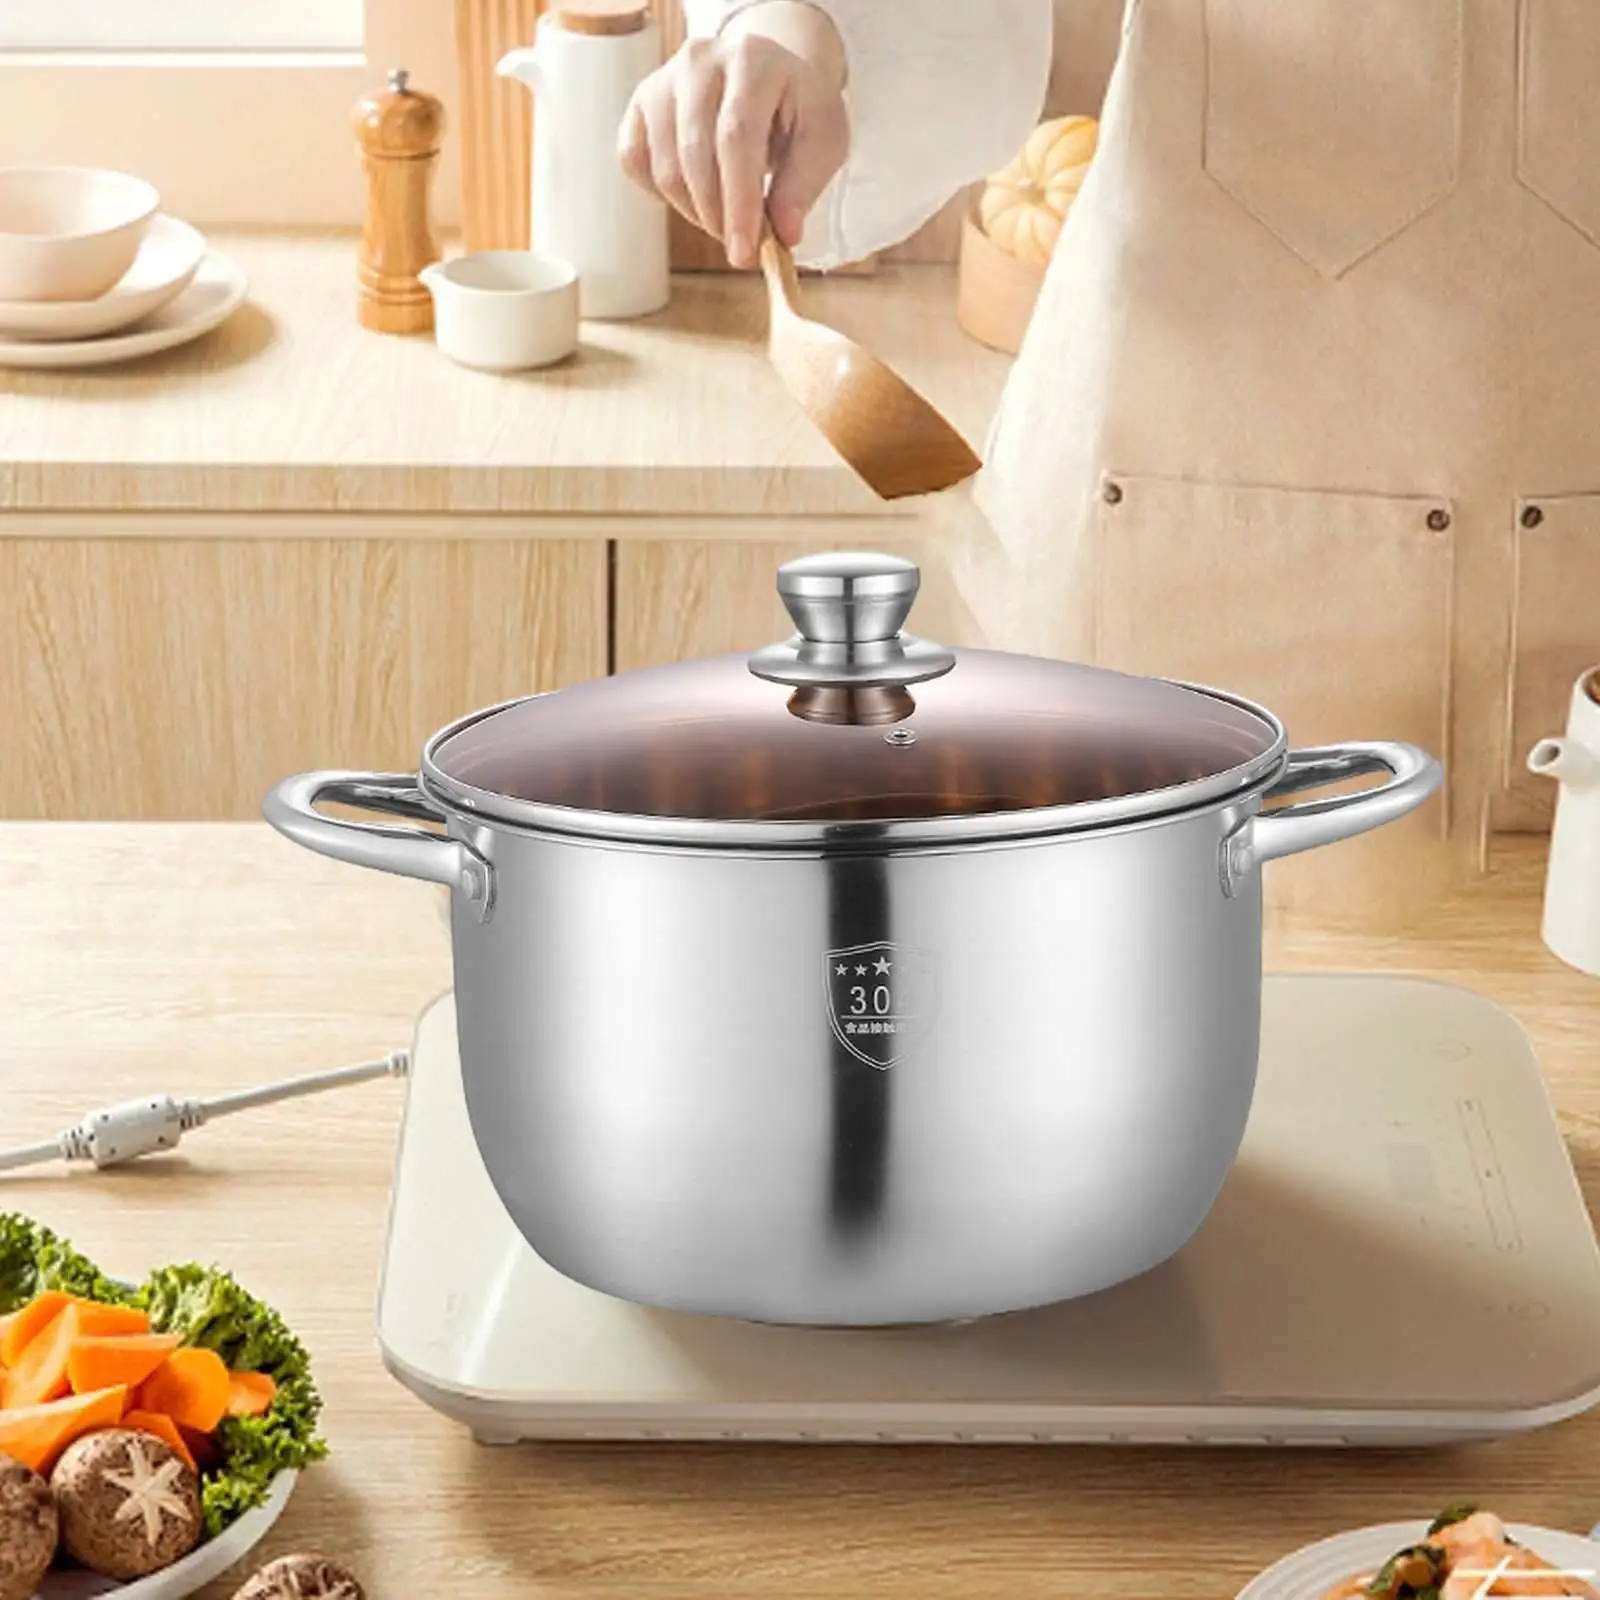 Stainless Steel Stockpot Kitchen Cooking Pot Insulated Handle Easy to Clean Non Stick Soup Pot Small Saucepan for Vegetables